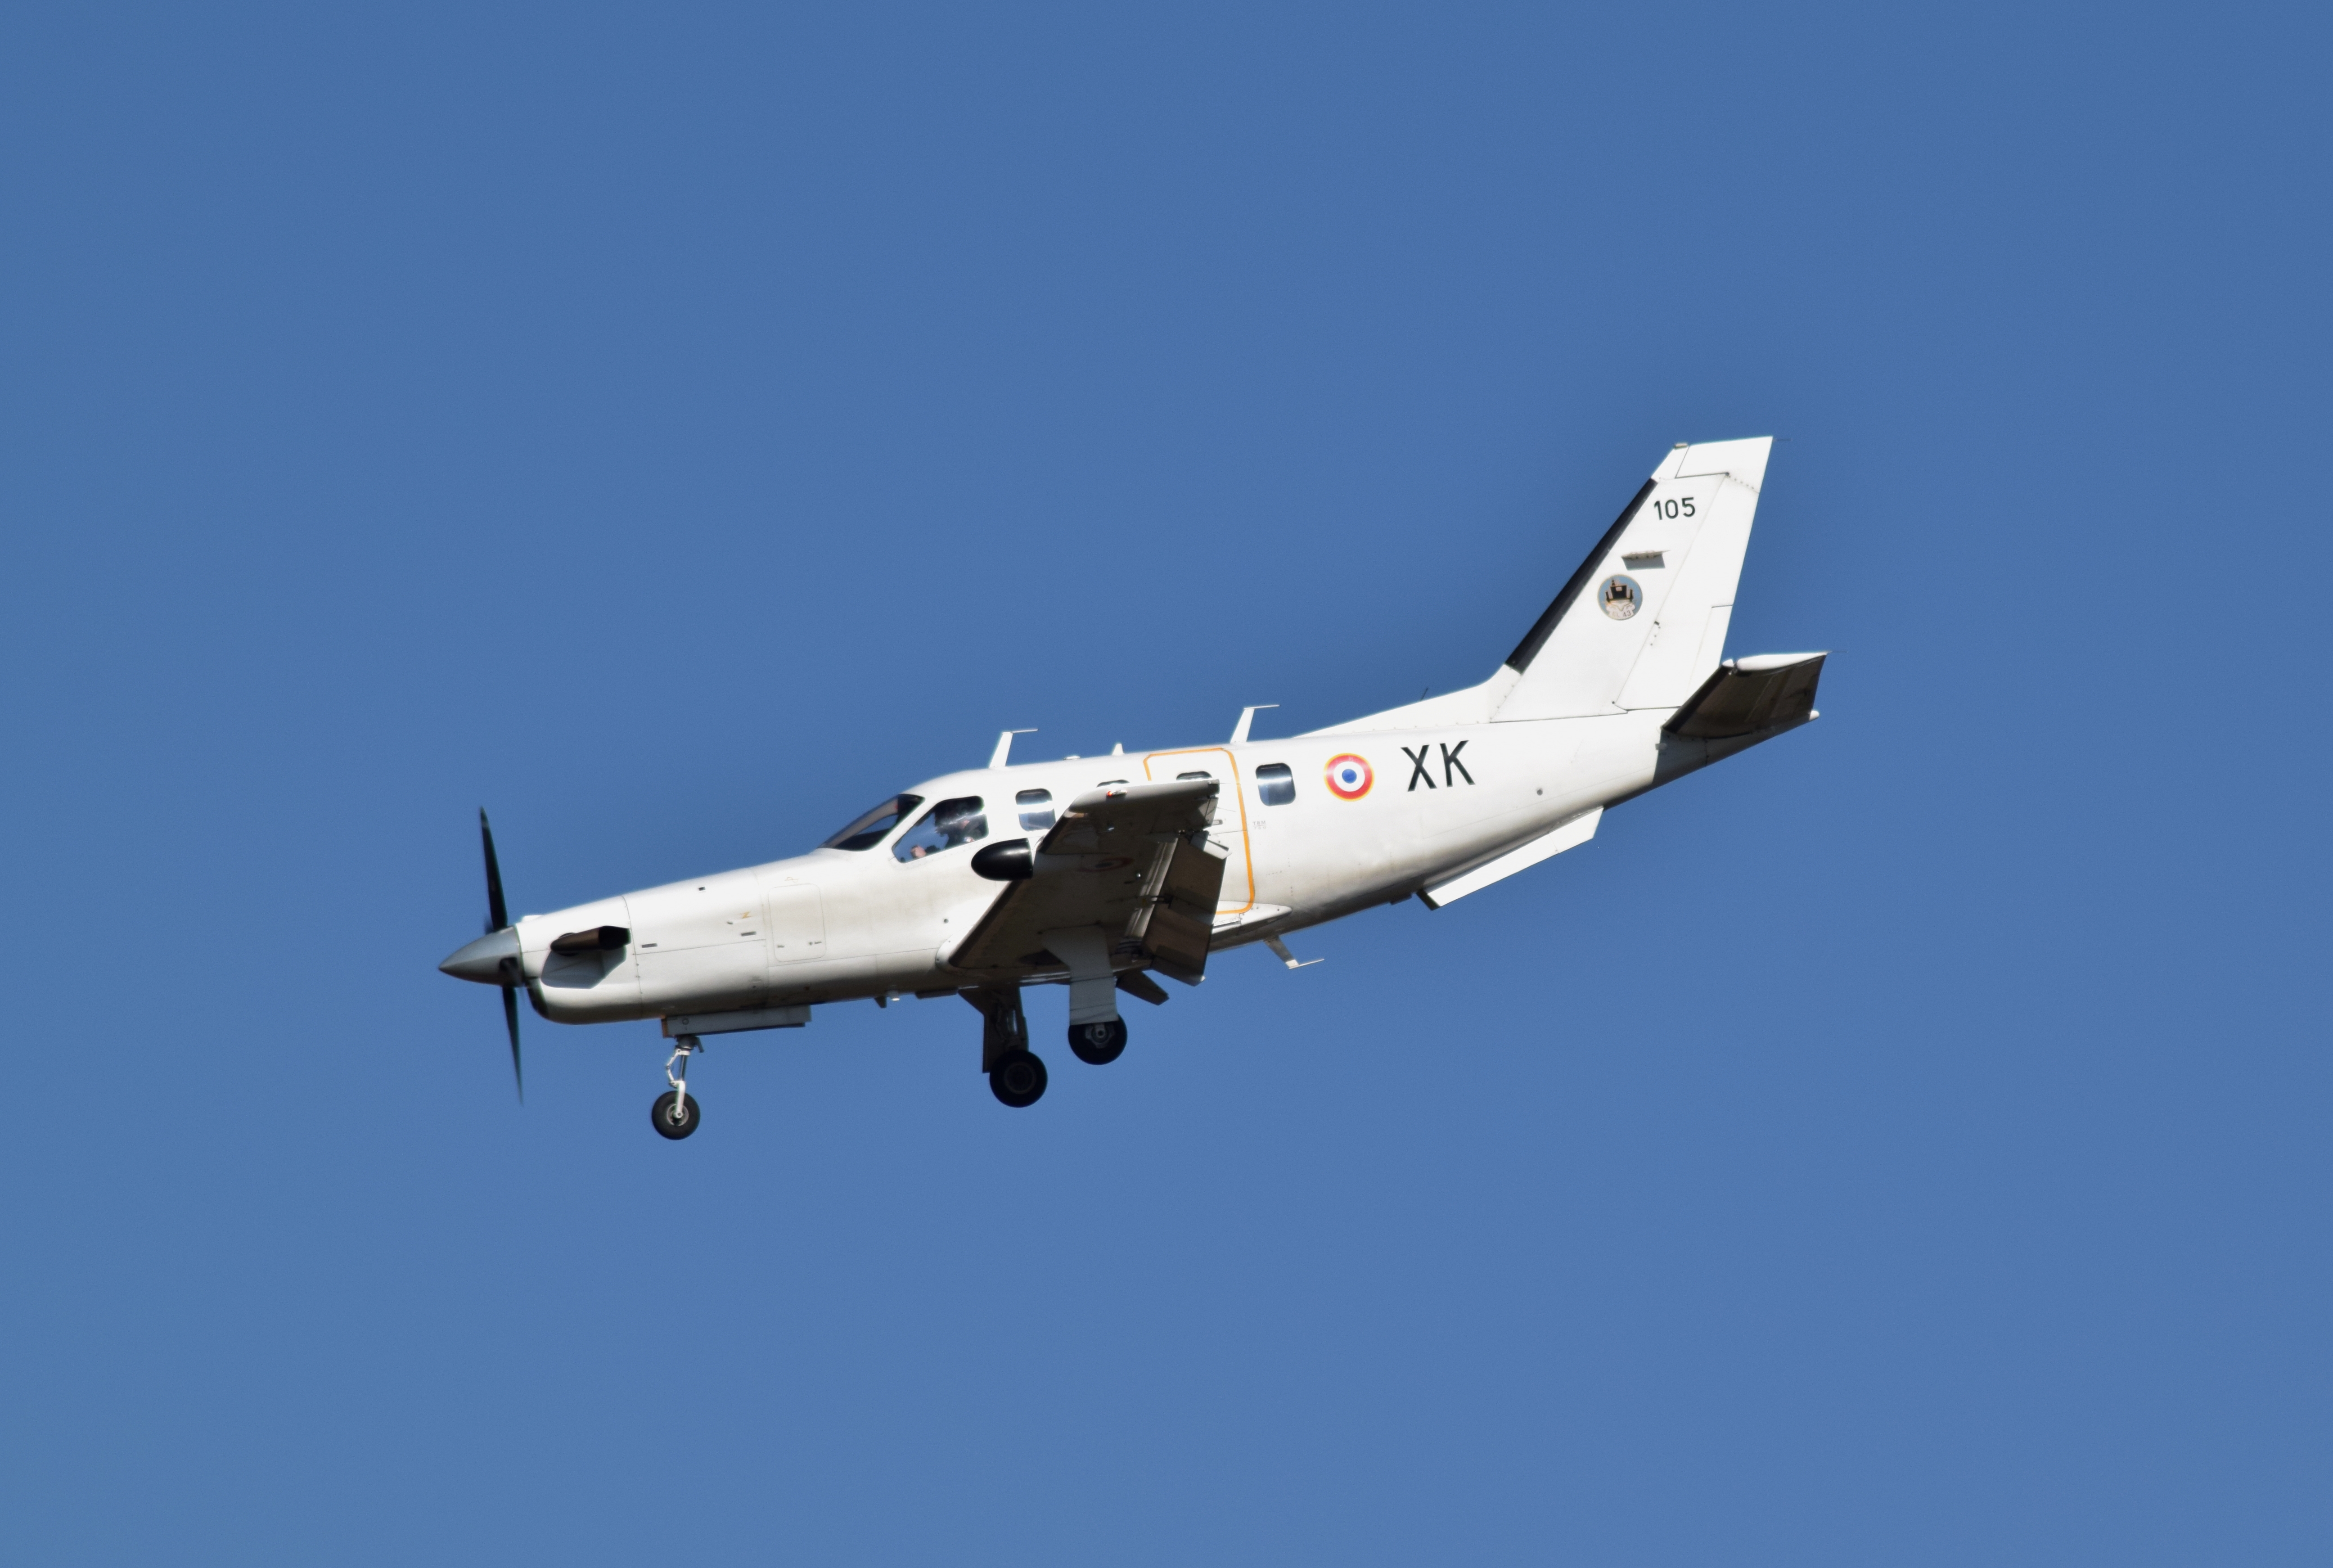 TBM700 FAF XK, Aircraft, Airliner, Airplane, Jet, HQ Photo